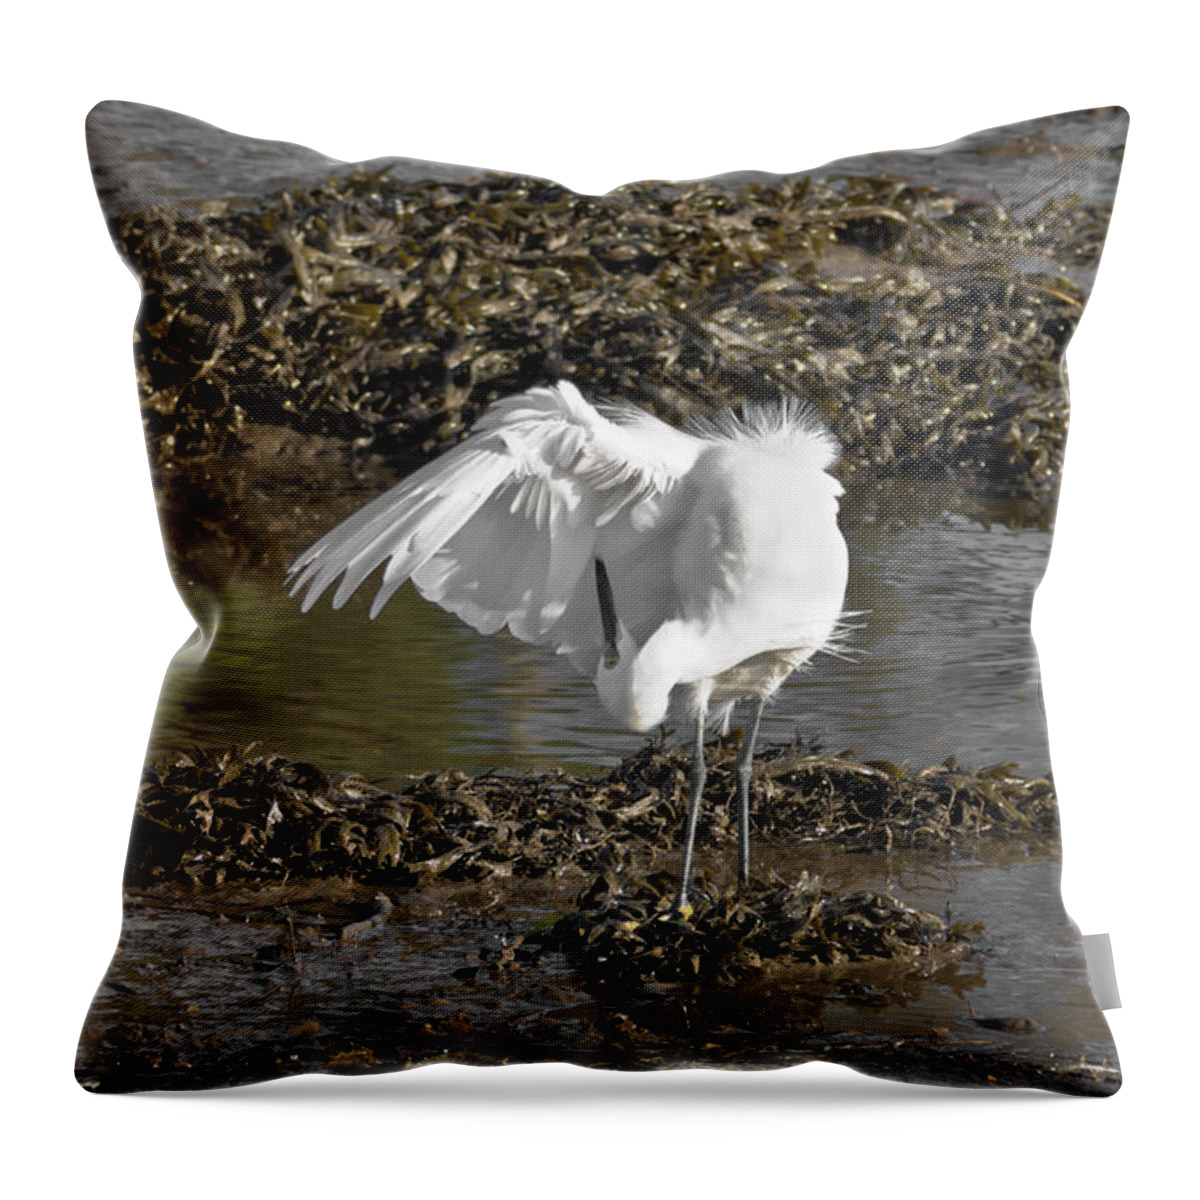 Bird Throw Pillow featuring the photograph Egret Preening by Terri Waters